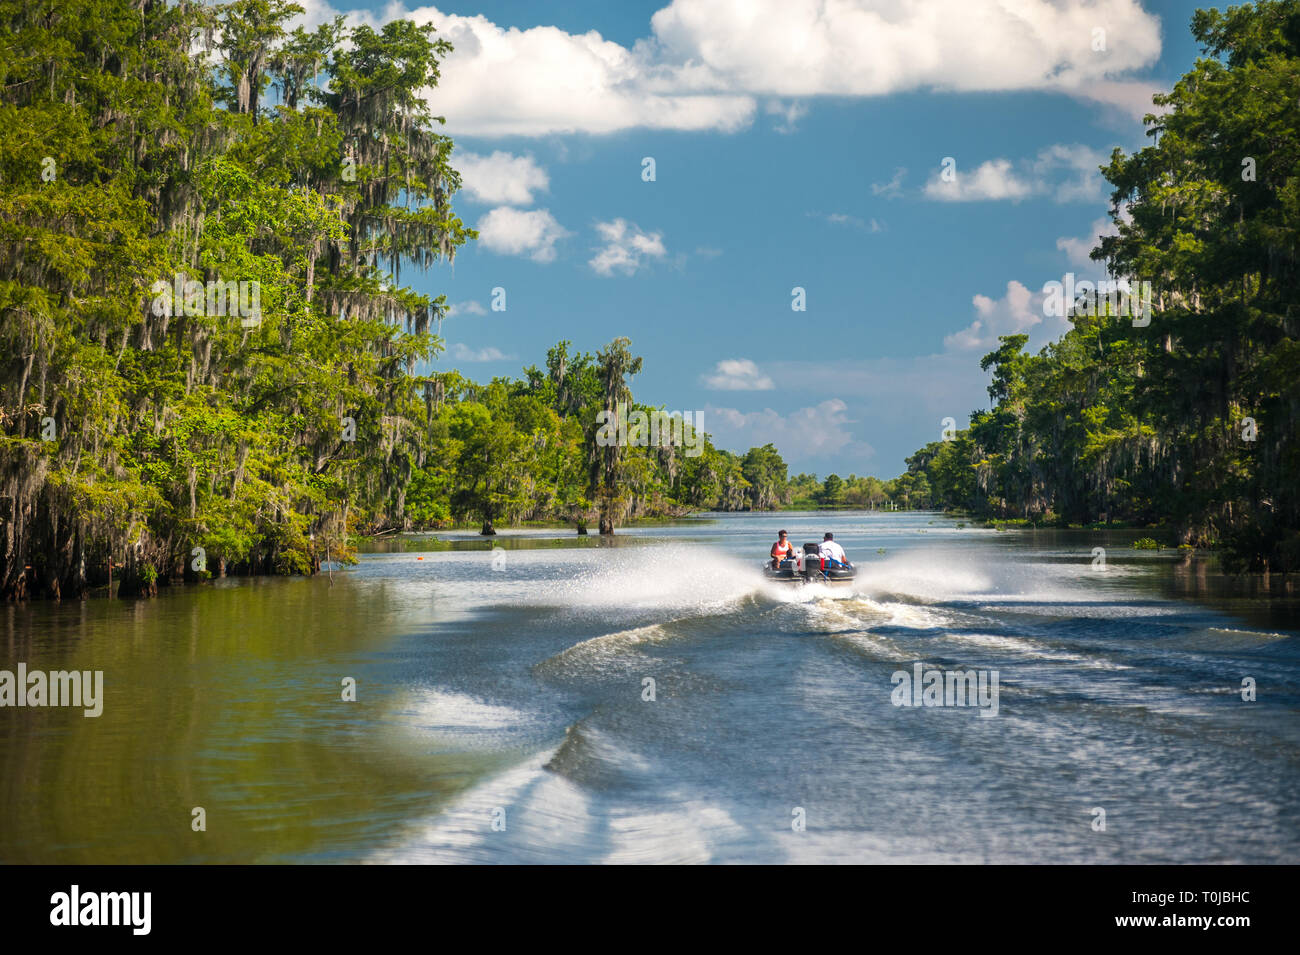 With a speed boat in the Swamps of Louisiana, Bayou Black, United States of America, North America Stock Photo